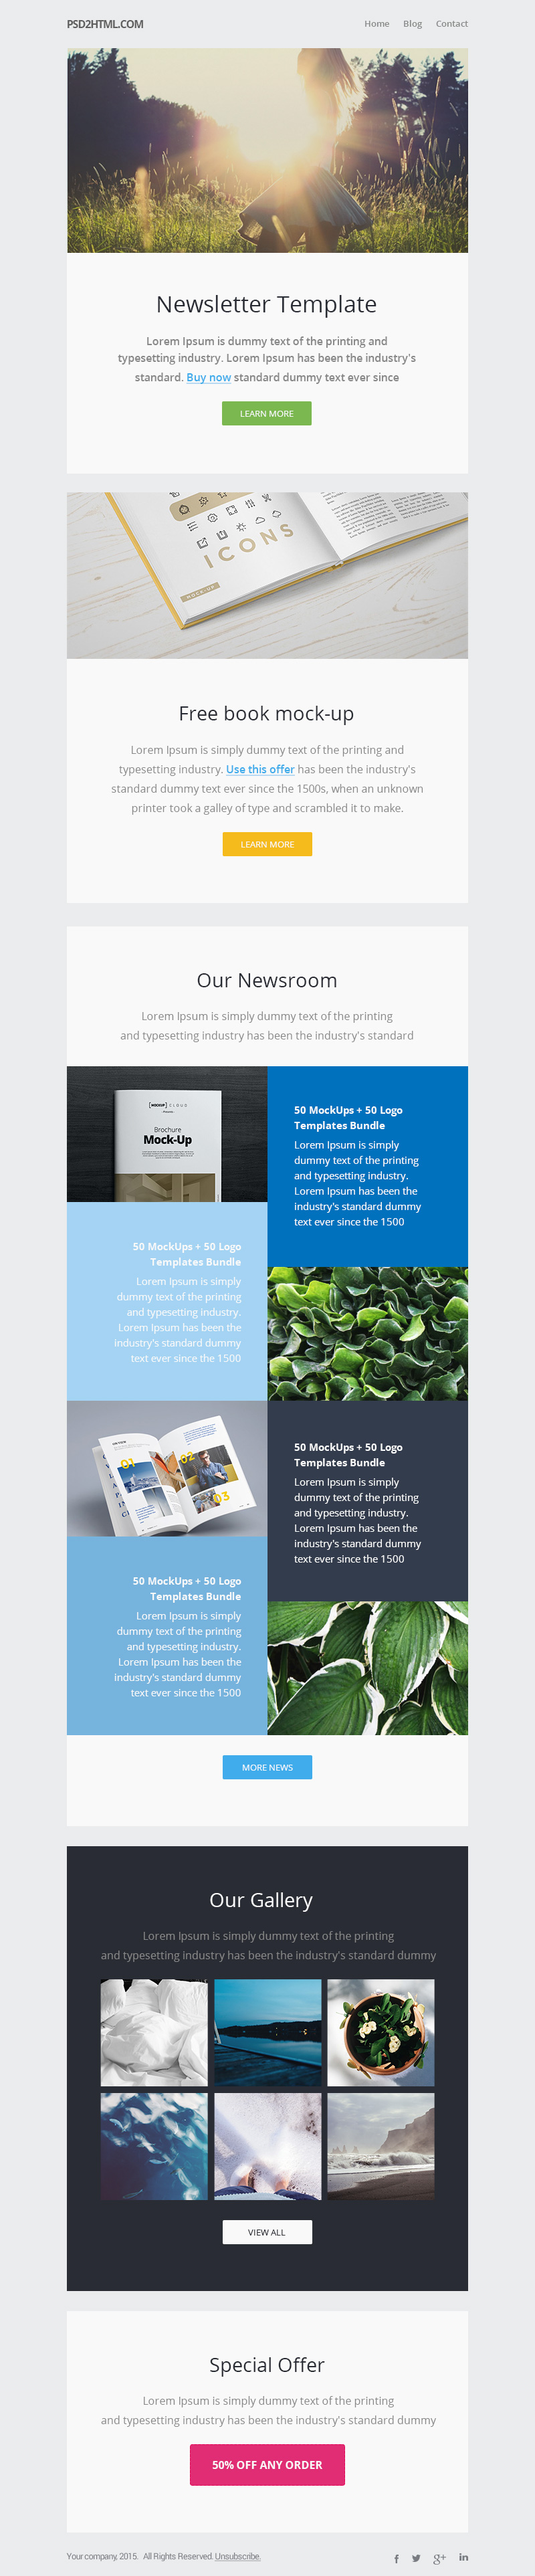 Free Newsletter Template Psd Html Graphicsfuel